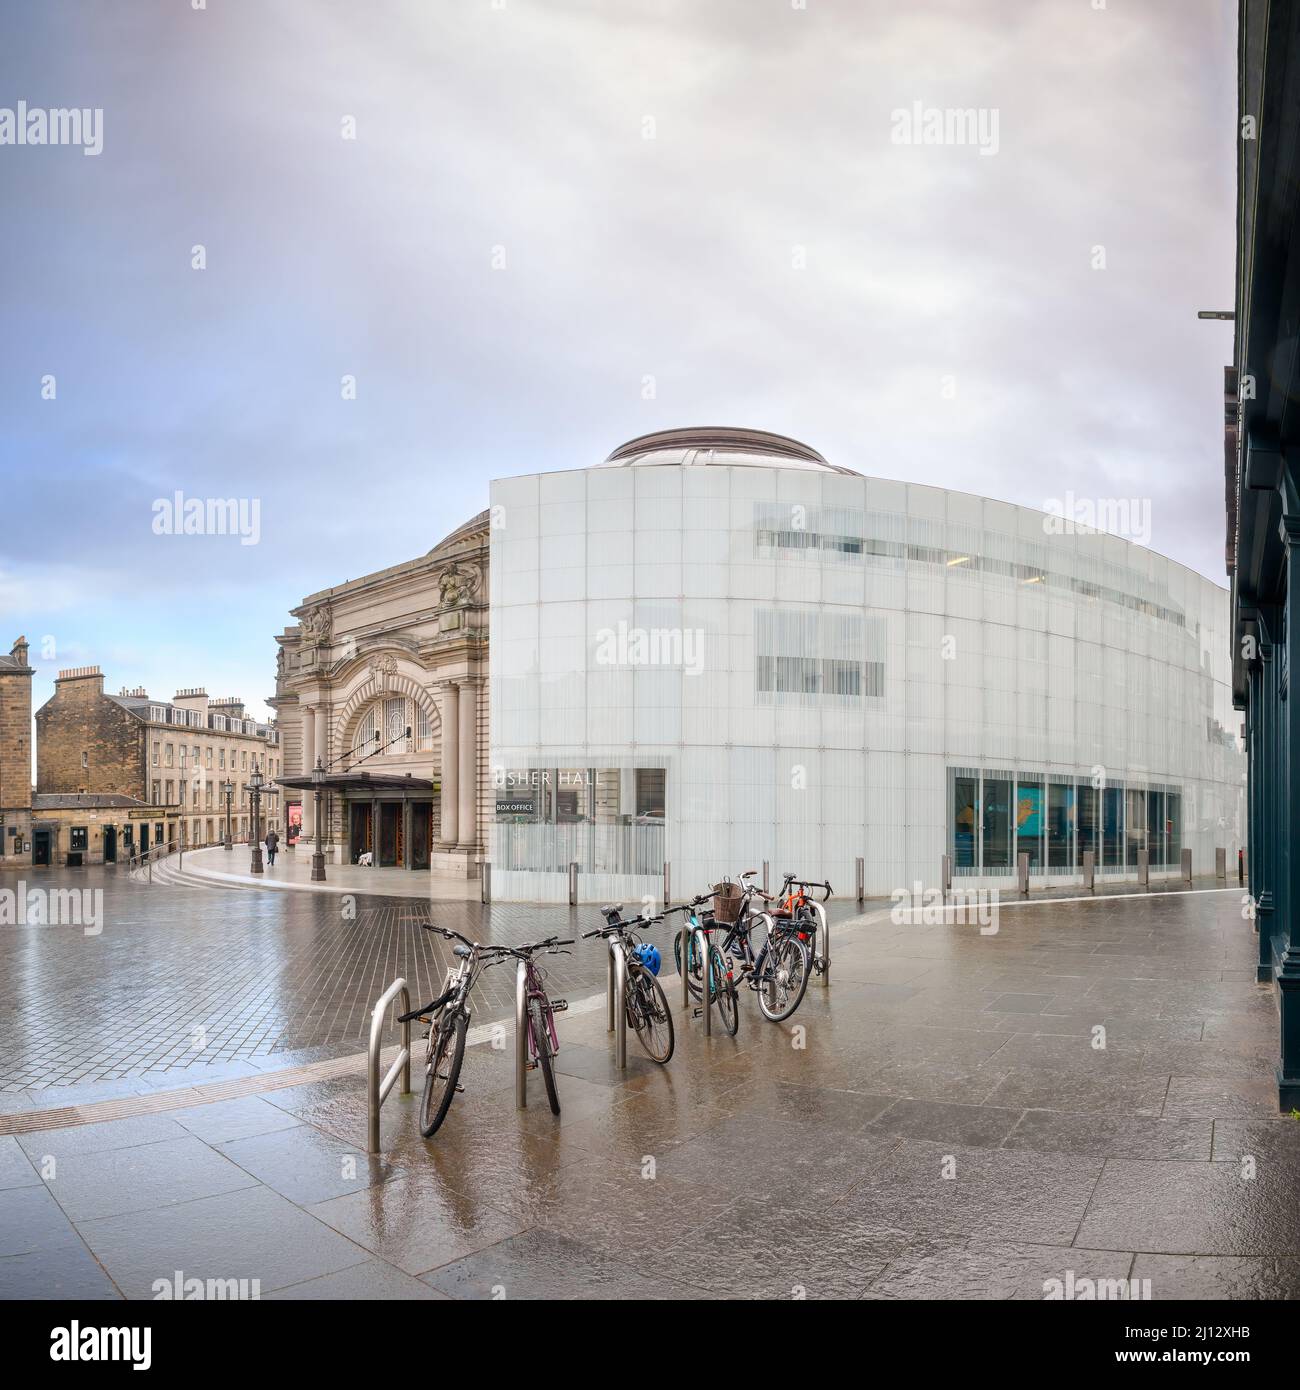 Edinburgh, Scotland, UK - Usher Hall with glazed extension by LDN Architects on a cloudy day Stock Photo